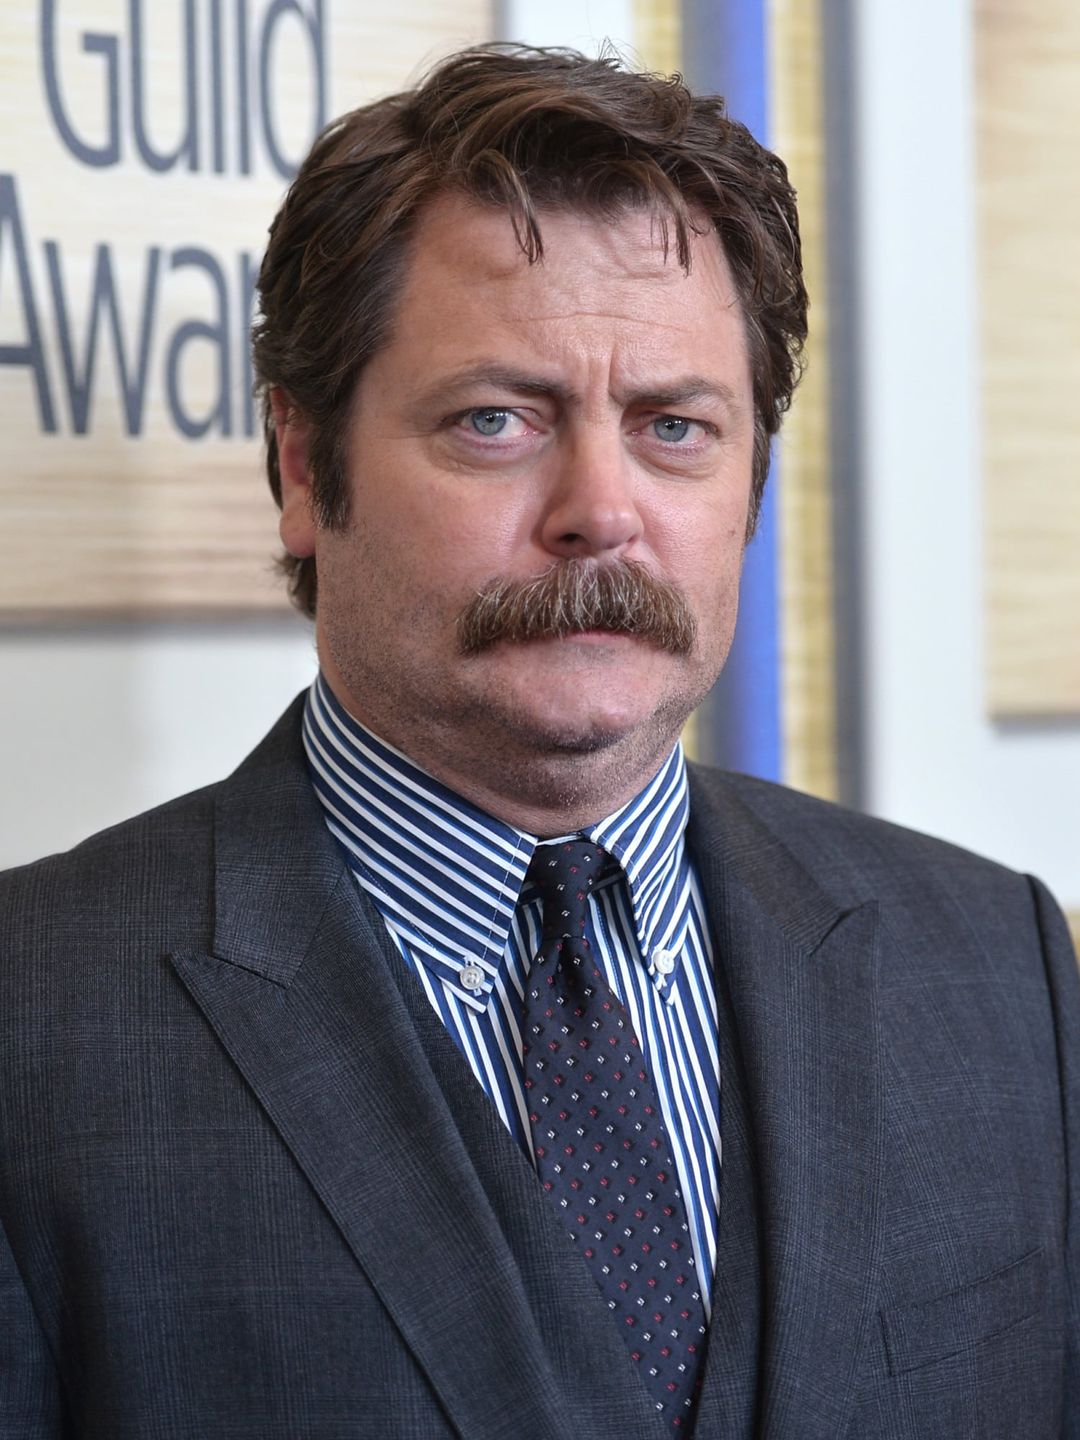 Nick Offerman does he have kids